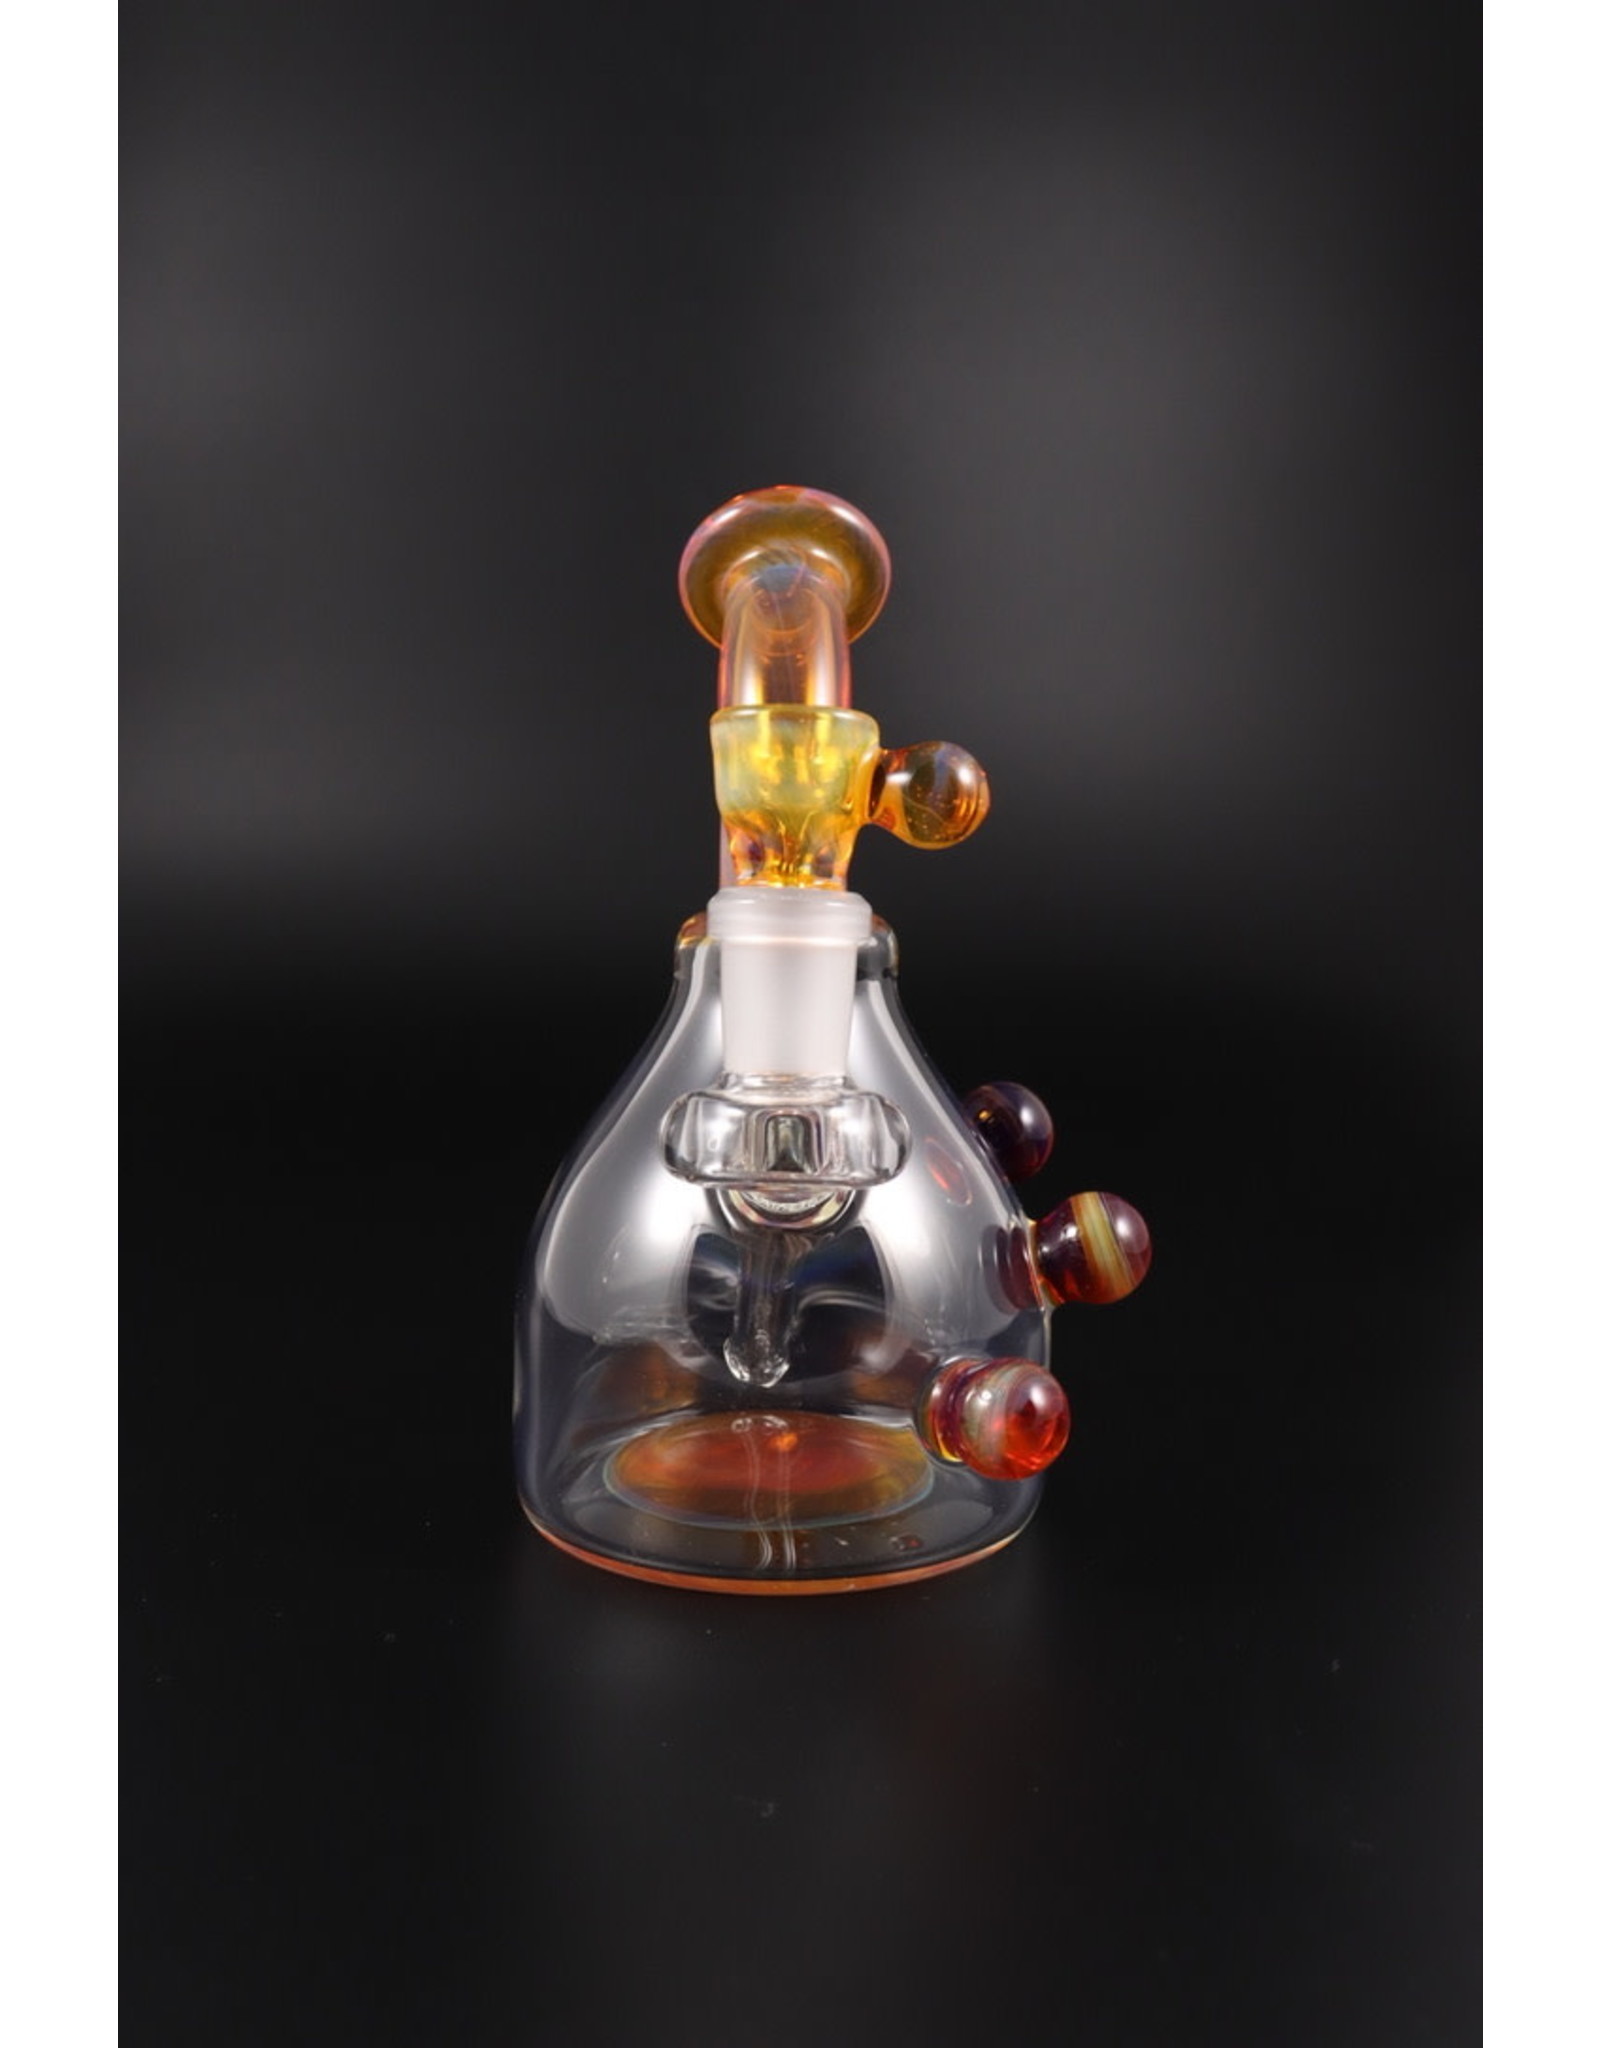 Muph Glass 14mm Female Banger Rig Water Pipe